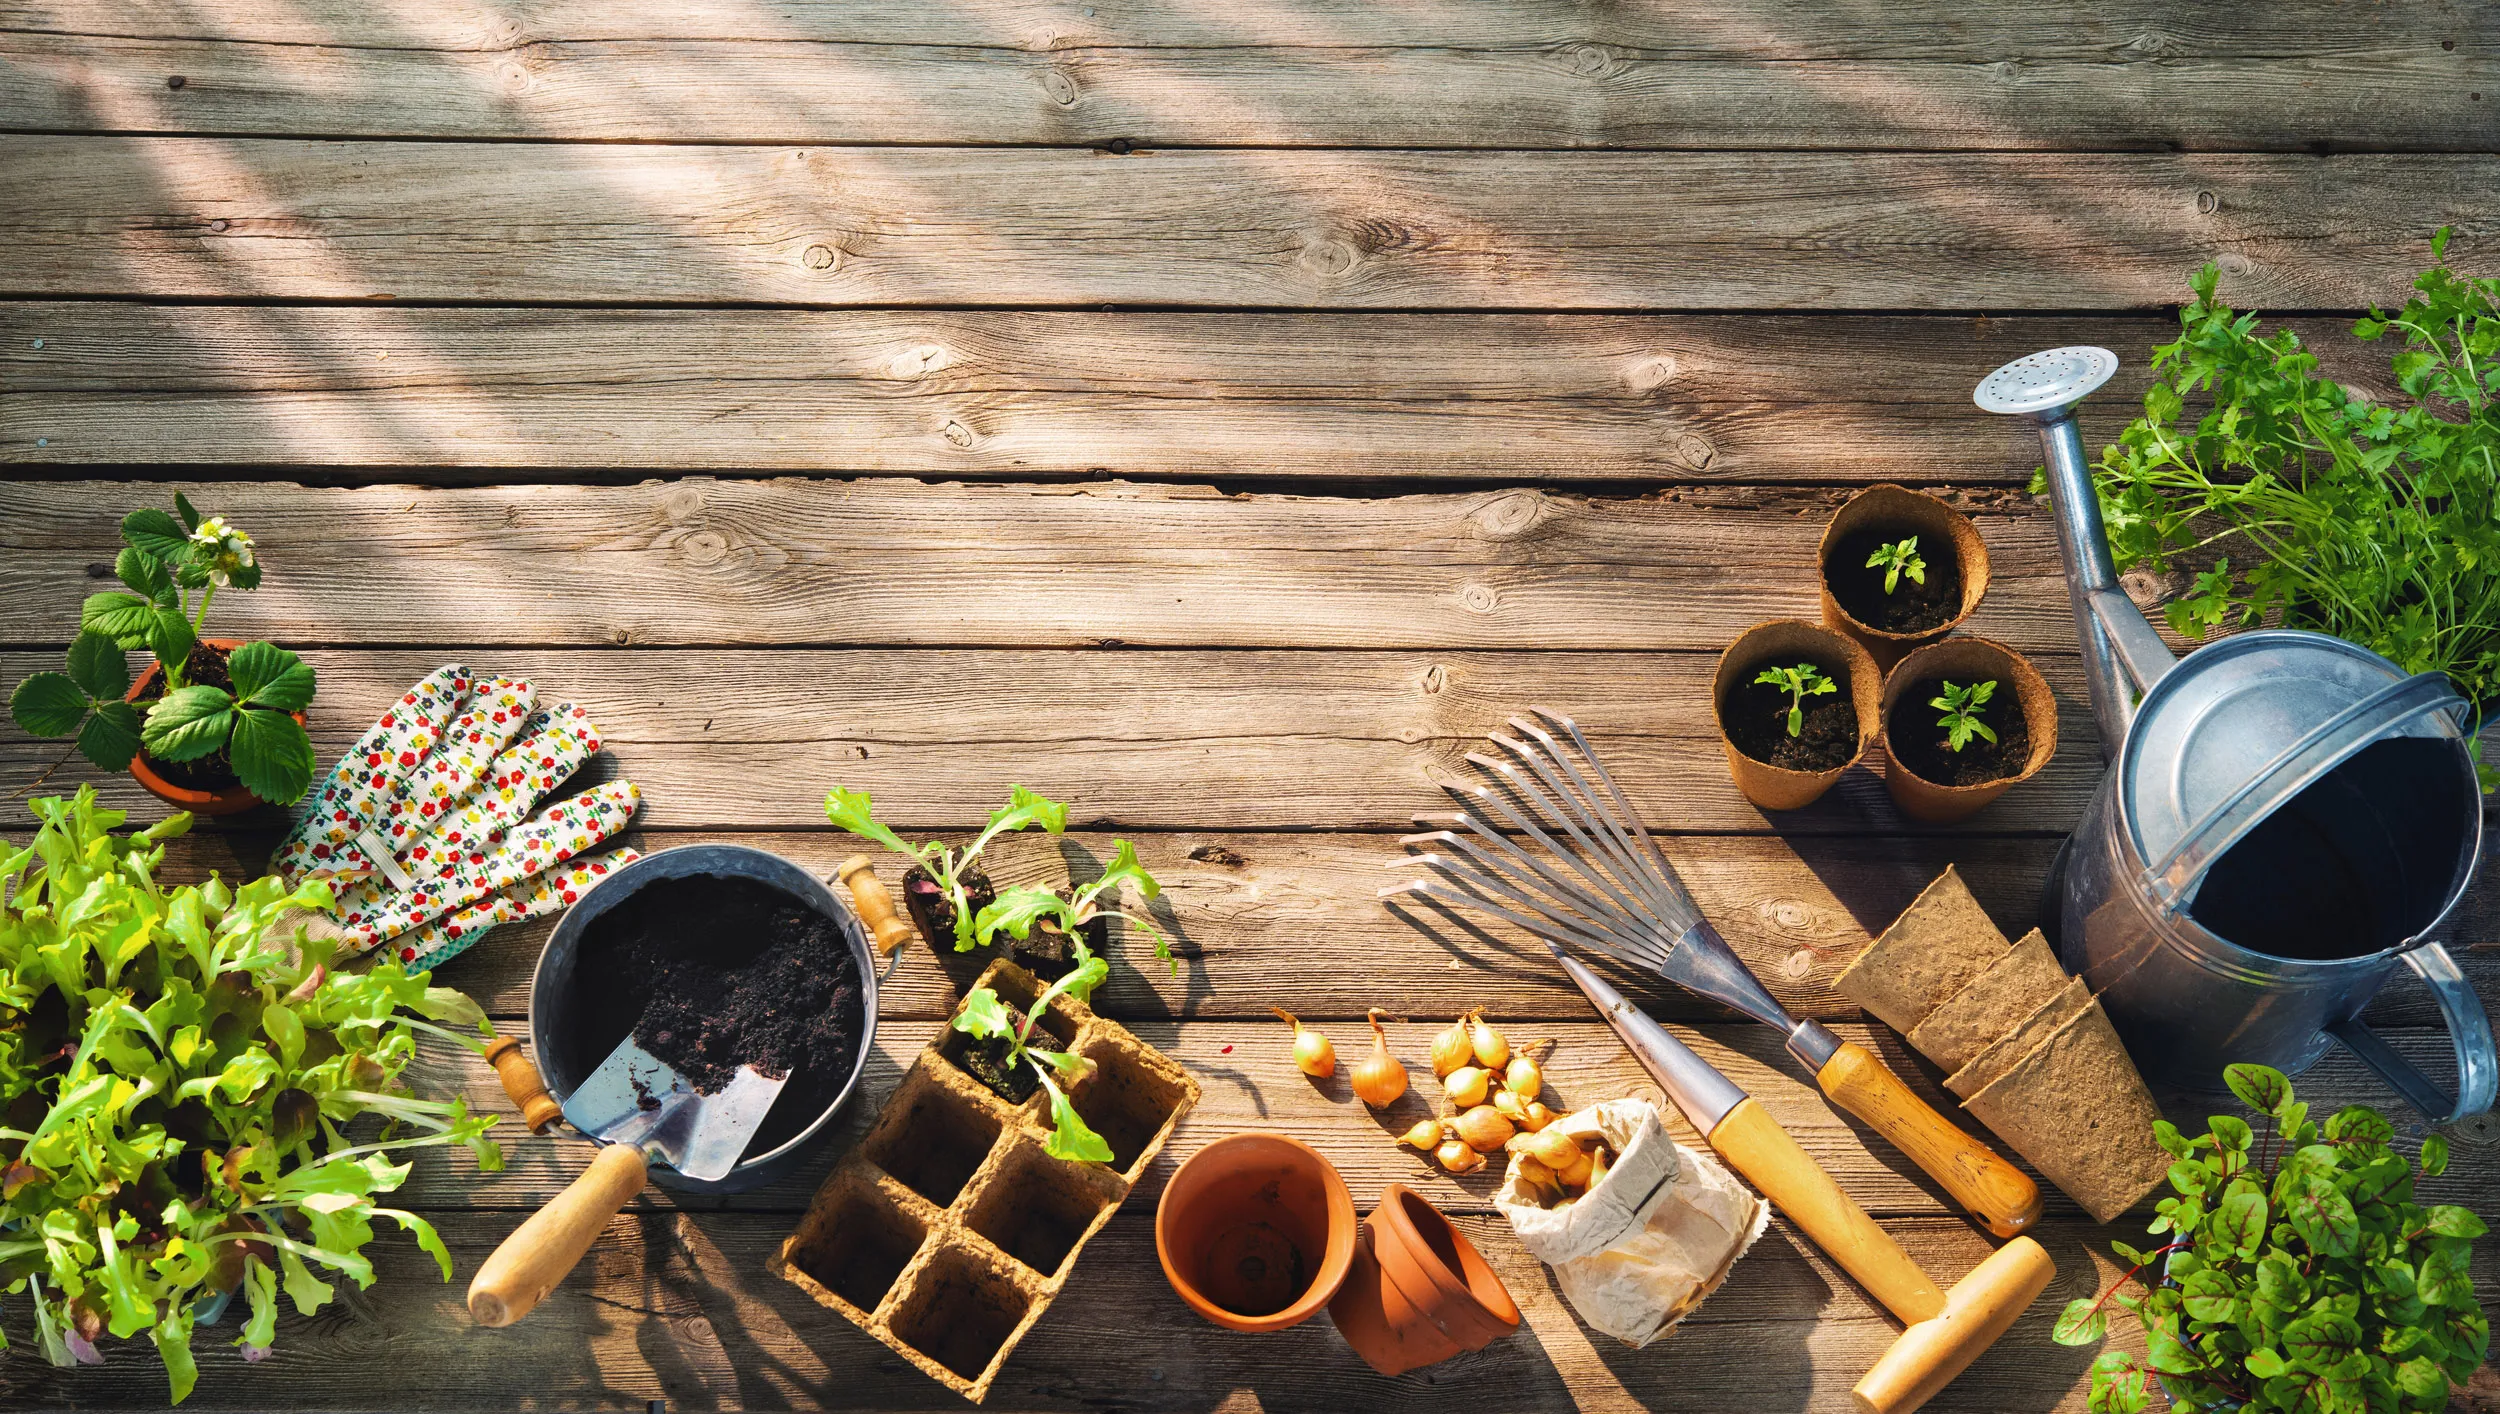 A wooden deck with an assortment of gardening tools, accessories and plants.